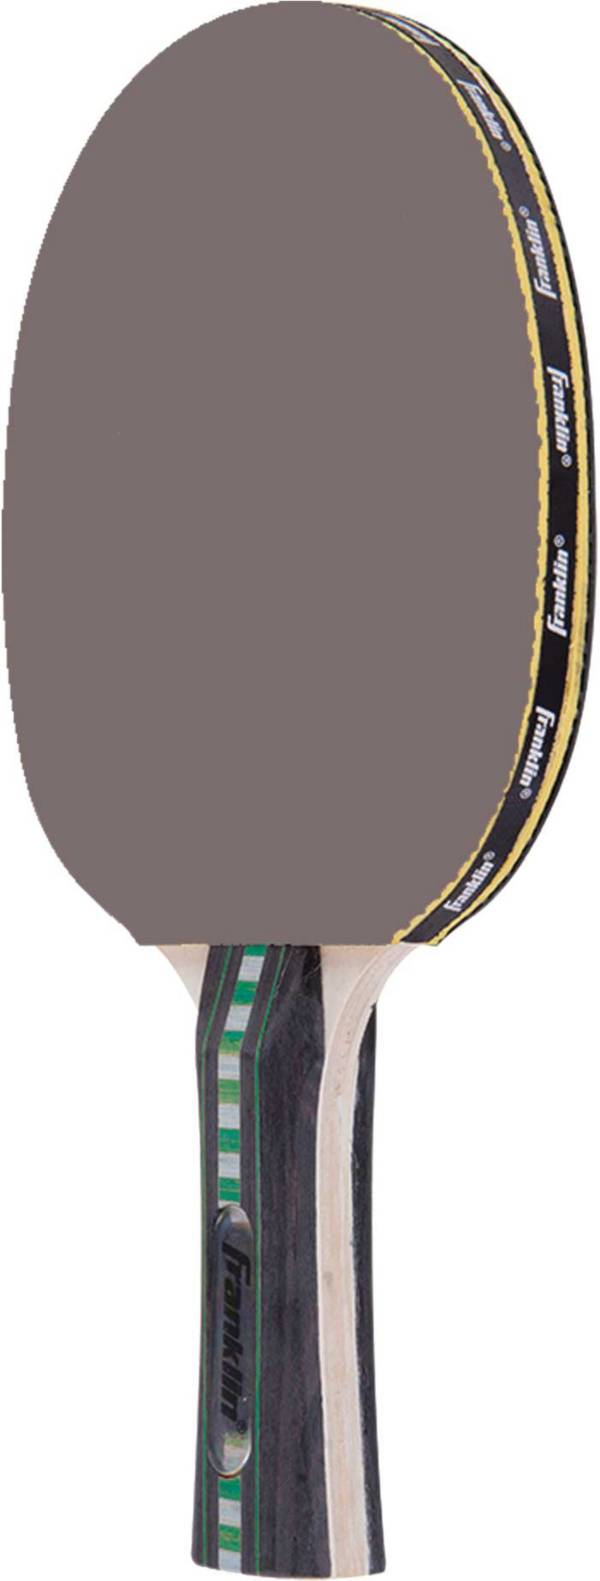 Franklin Procore Table Tennis Paddle product image